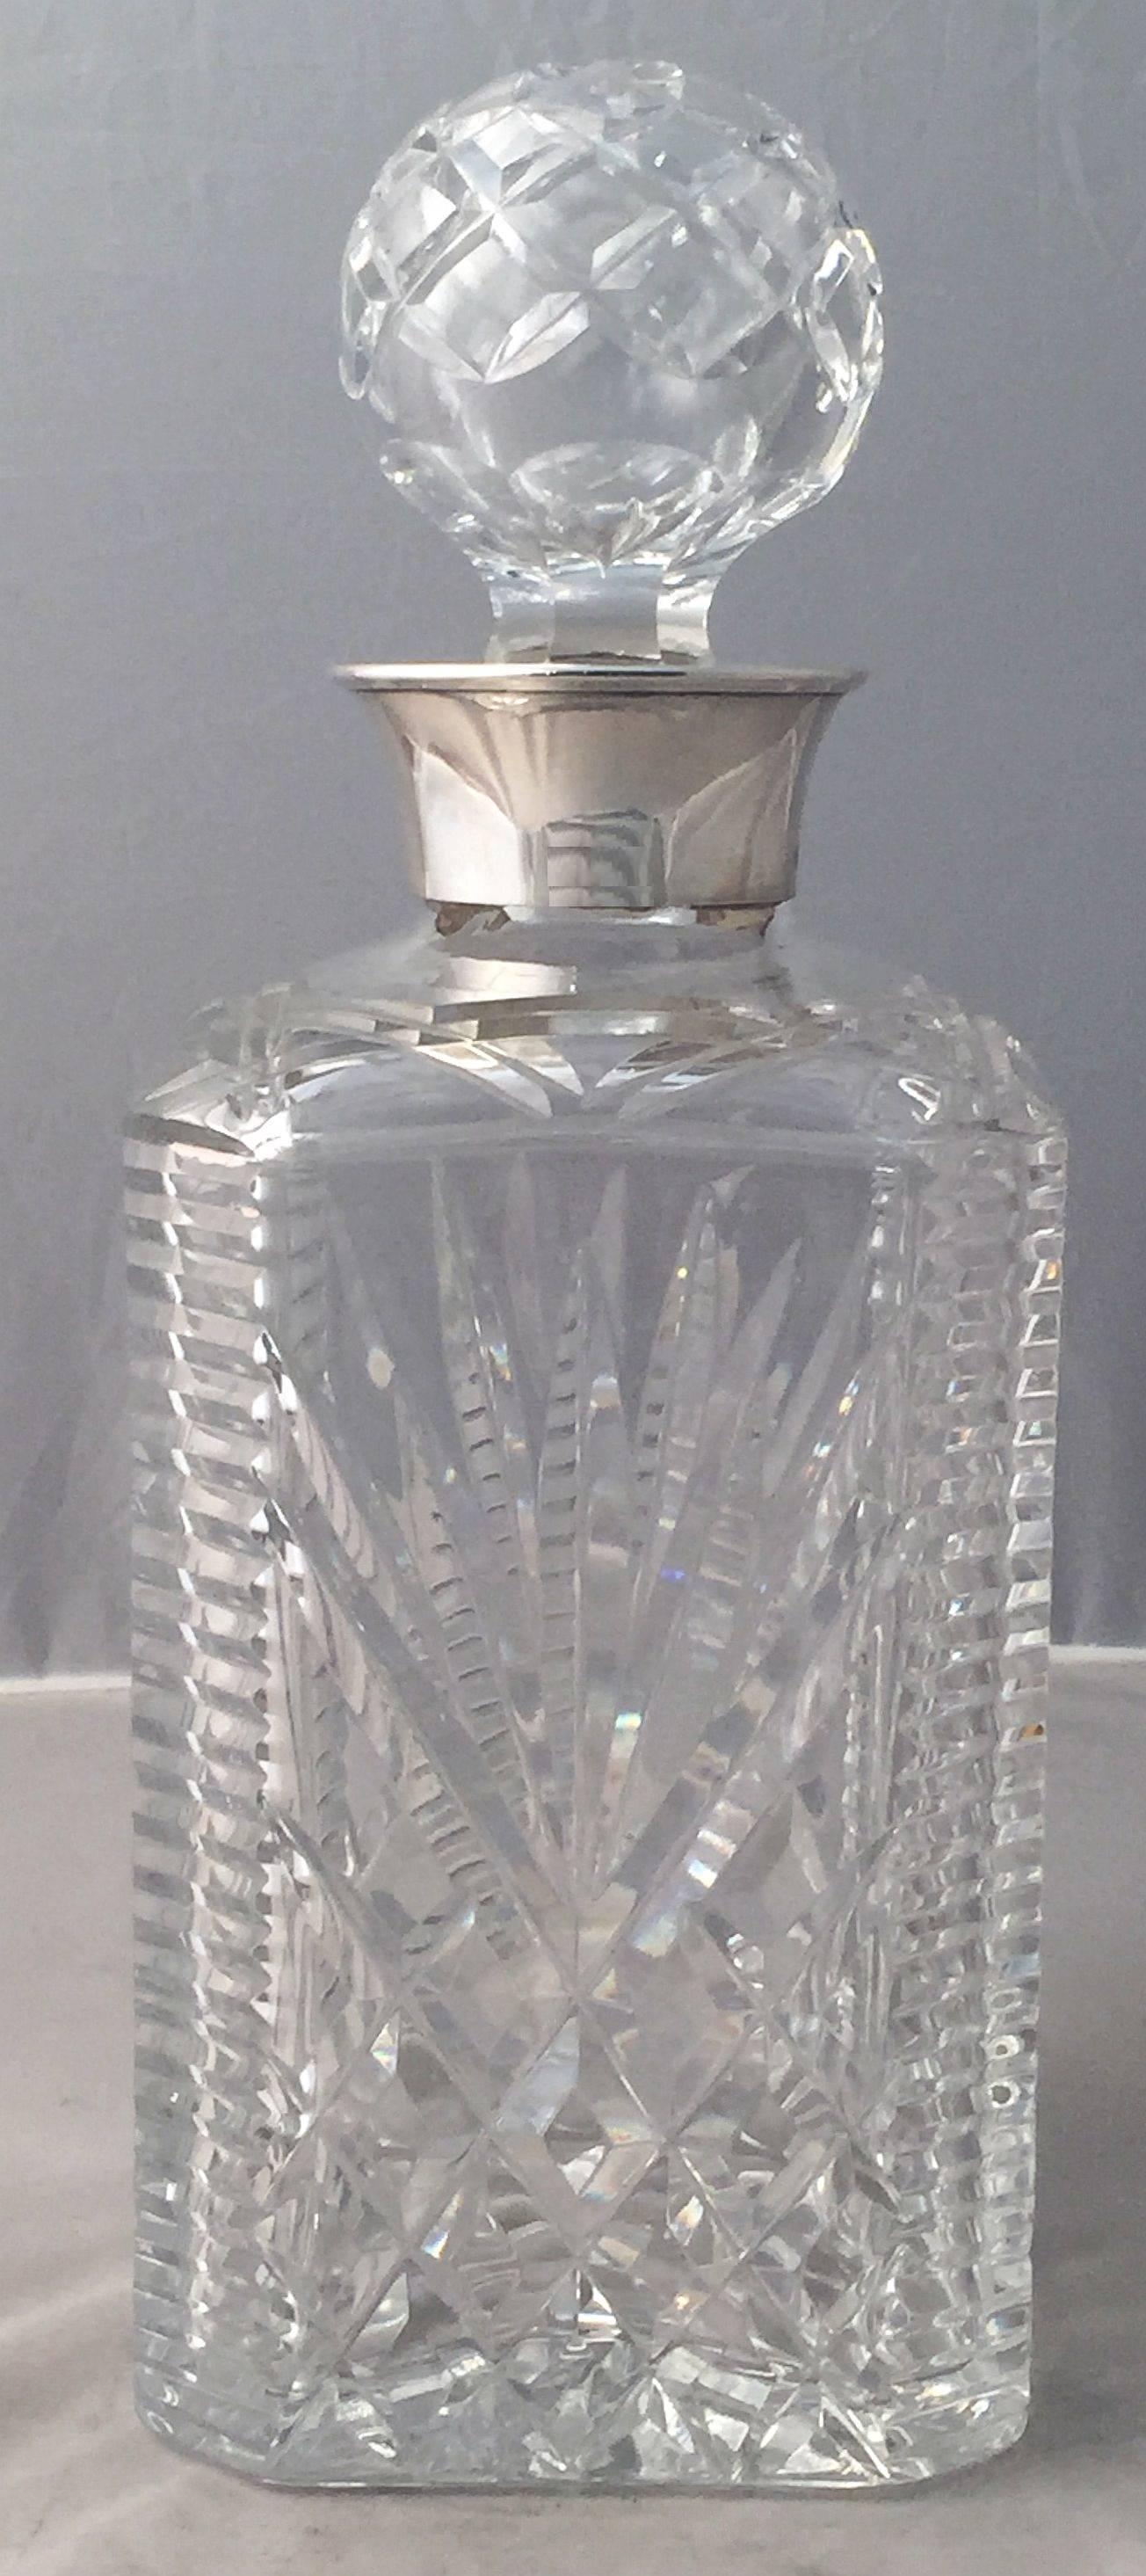 A handsome English four-sided spirits or whiskey decanter of faceted cut crystal with sterling silver collar and removable round stopper.

Hallmarks for Birmingham.